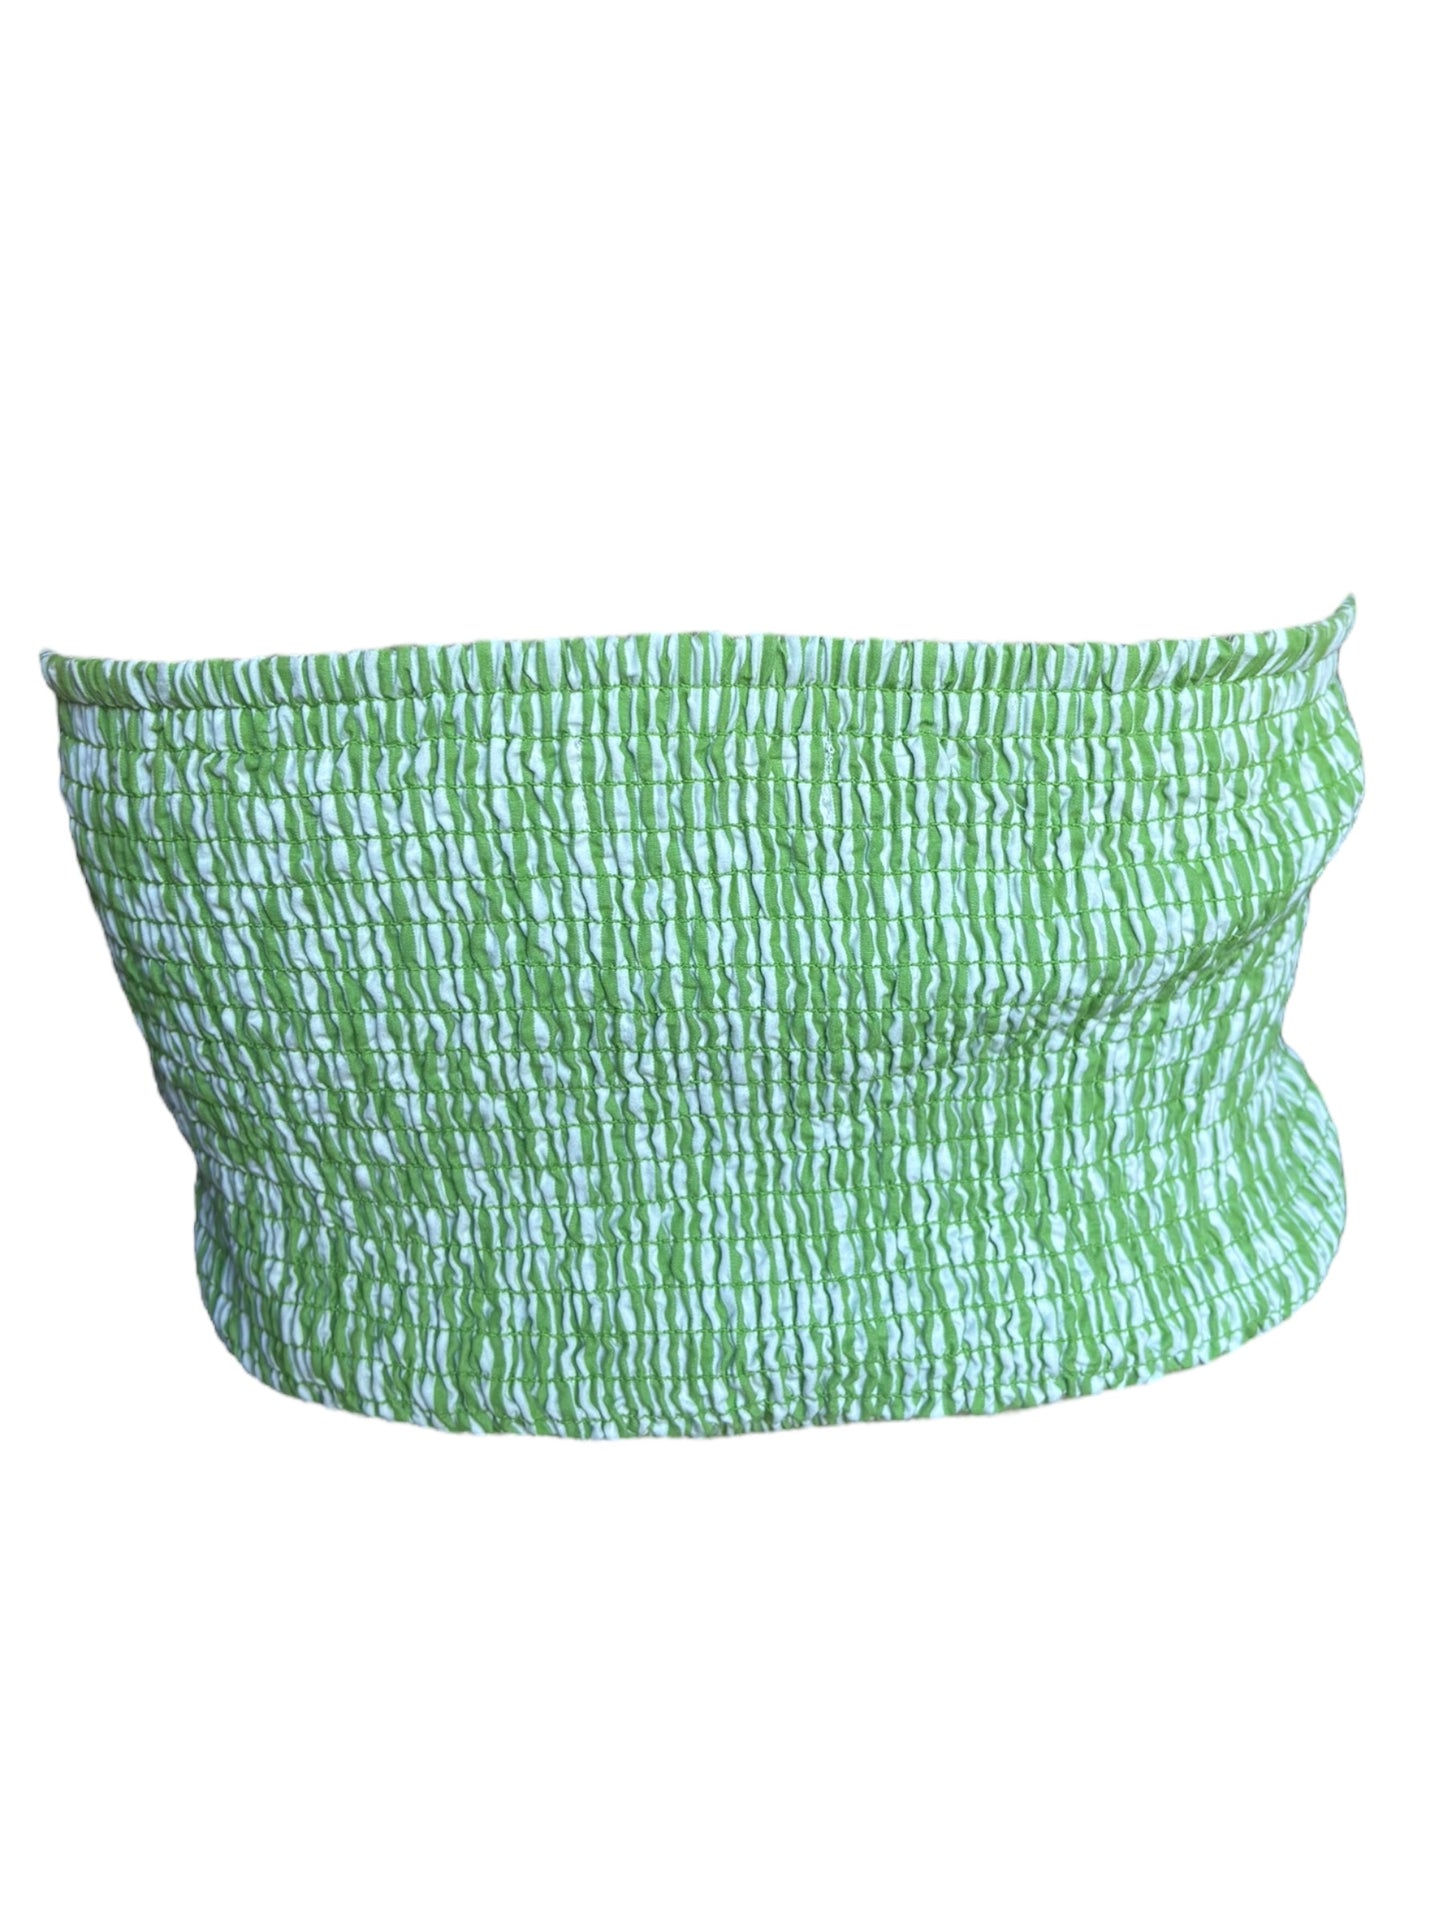 Upcycled Green Crop Top - S